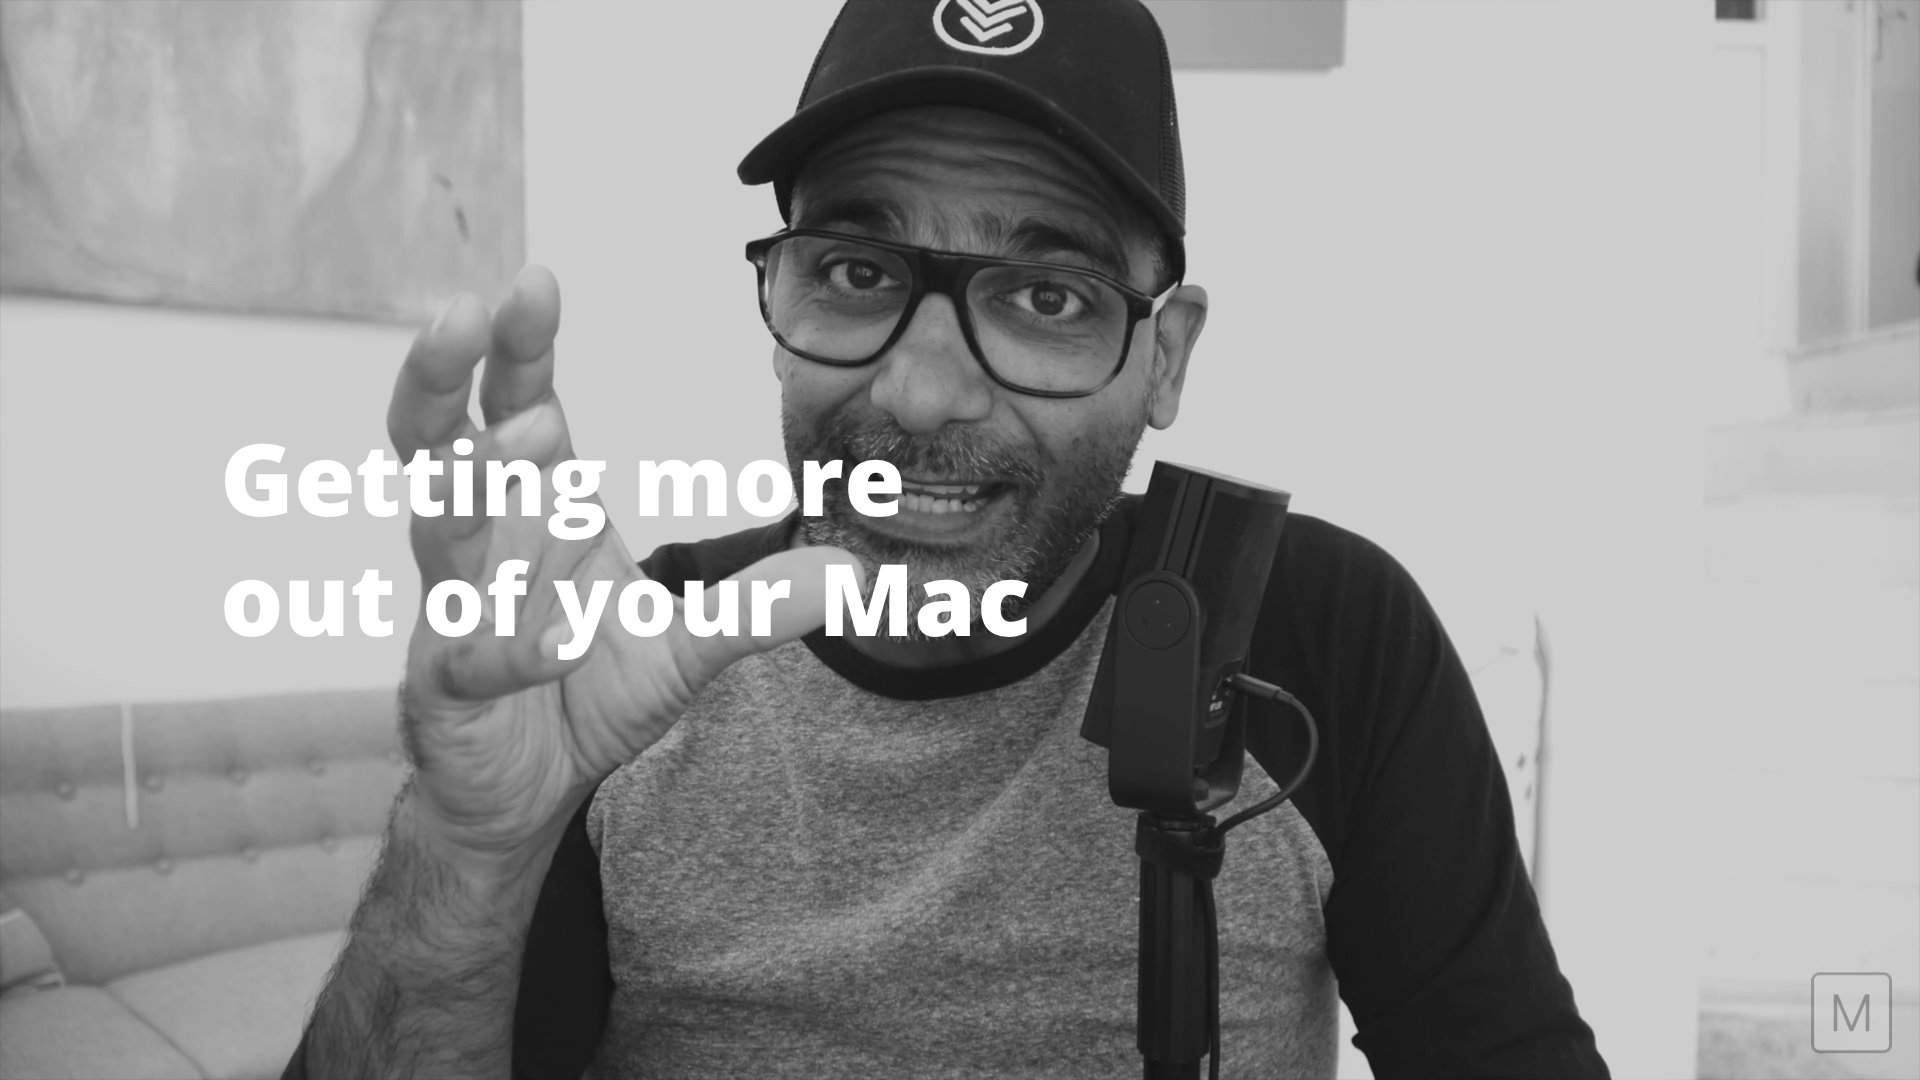 Getting more out of your Mac